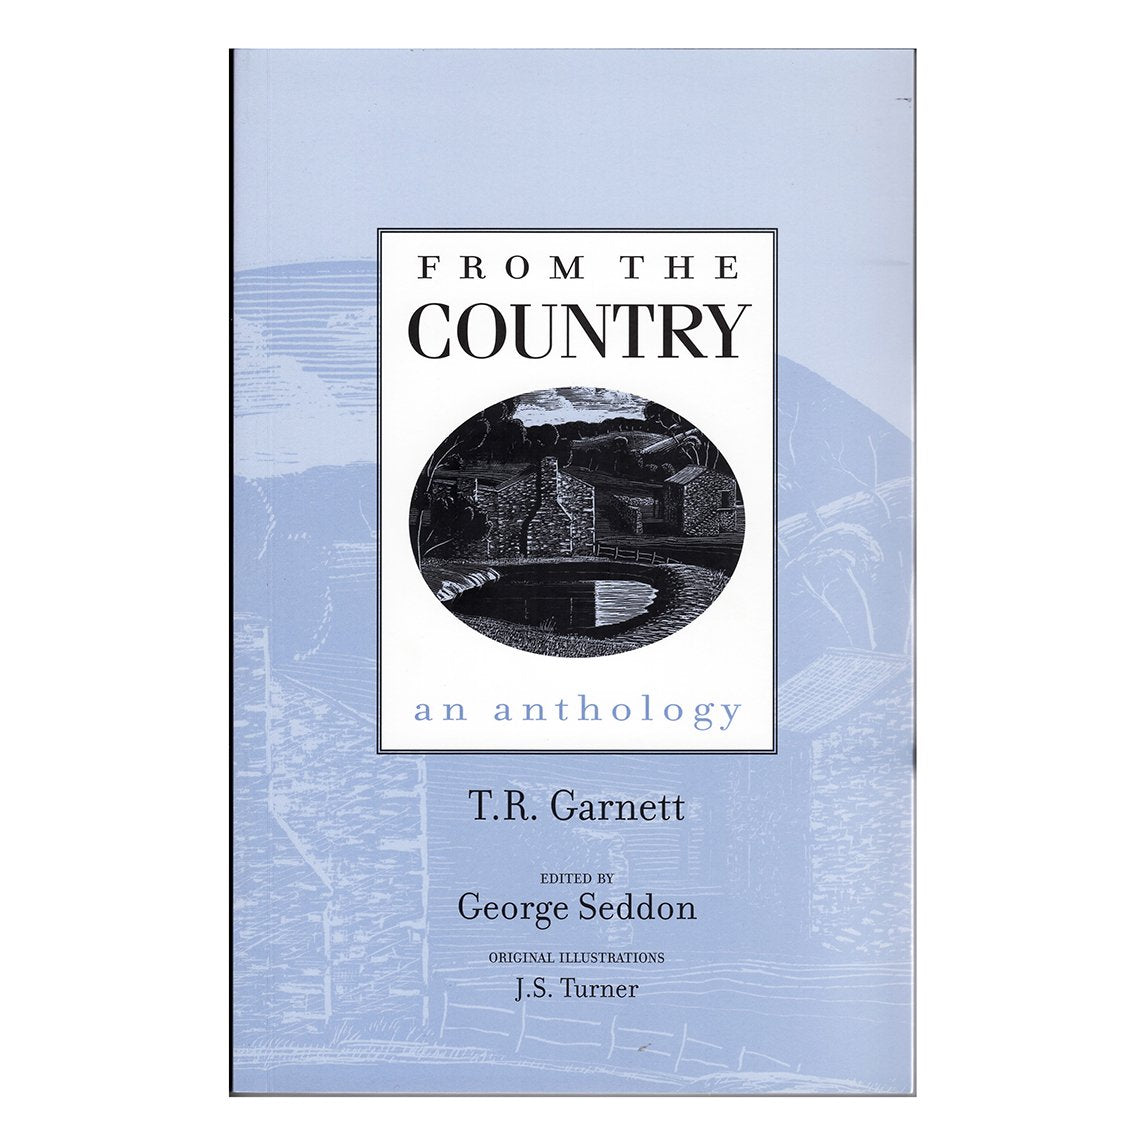 From The Country - T.r.garnett